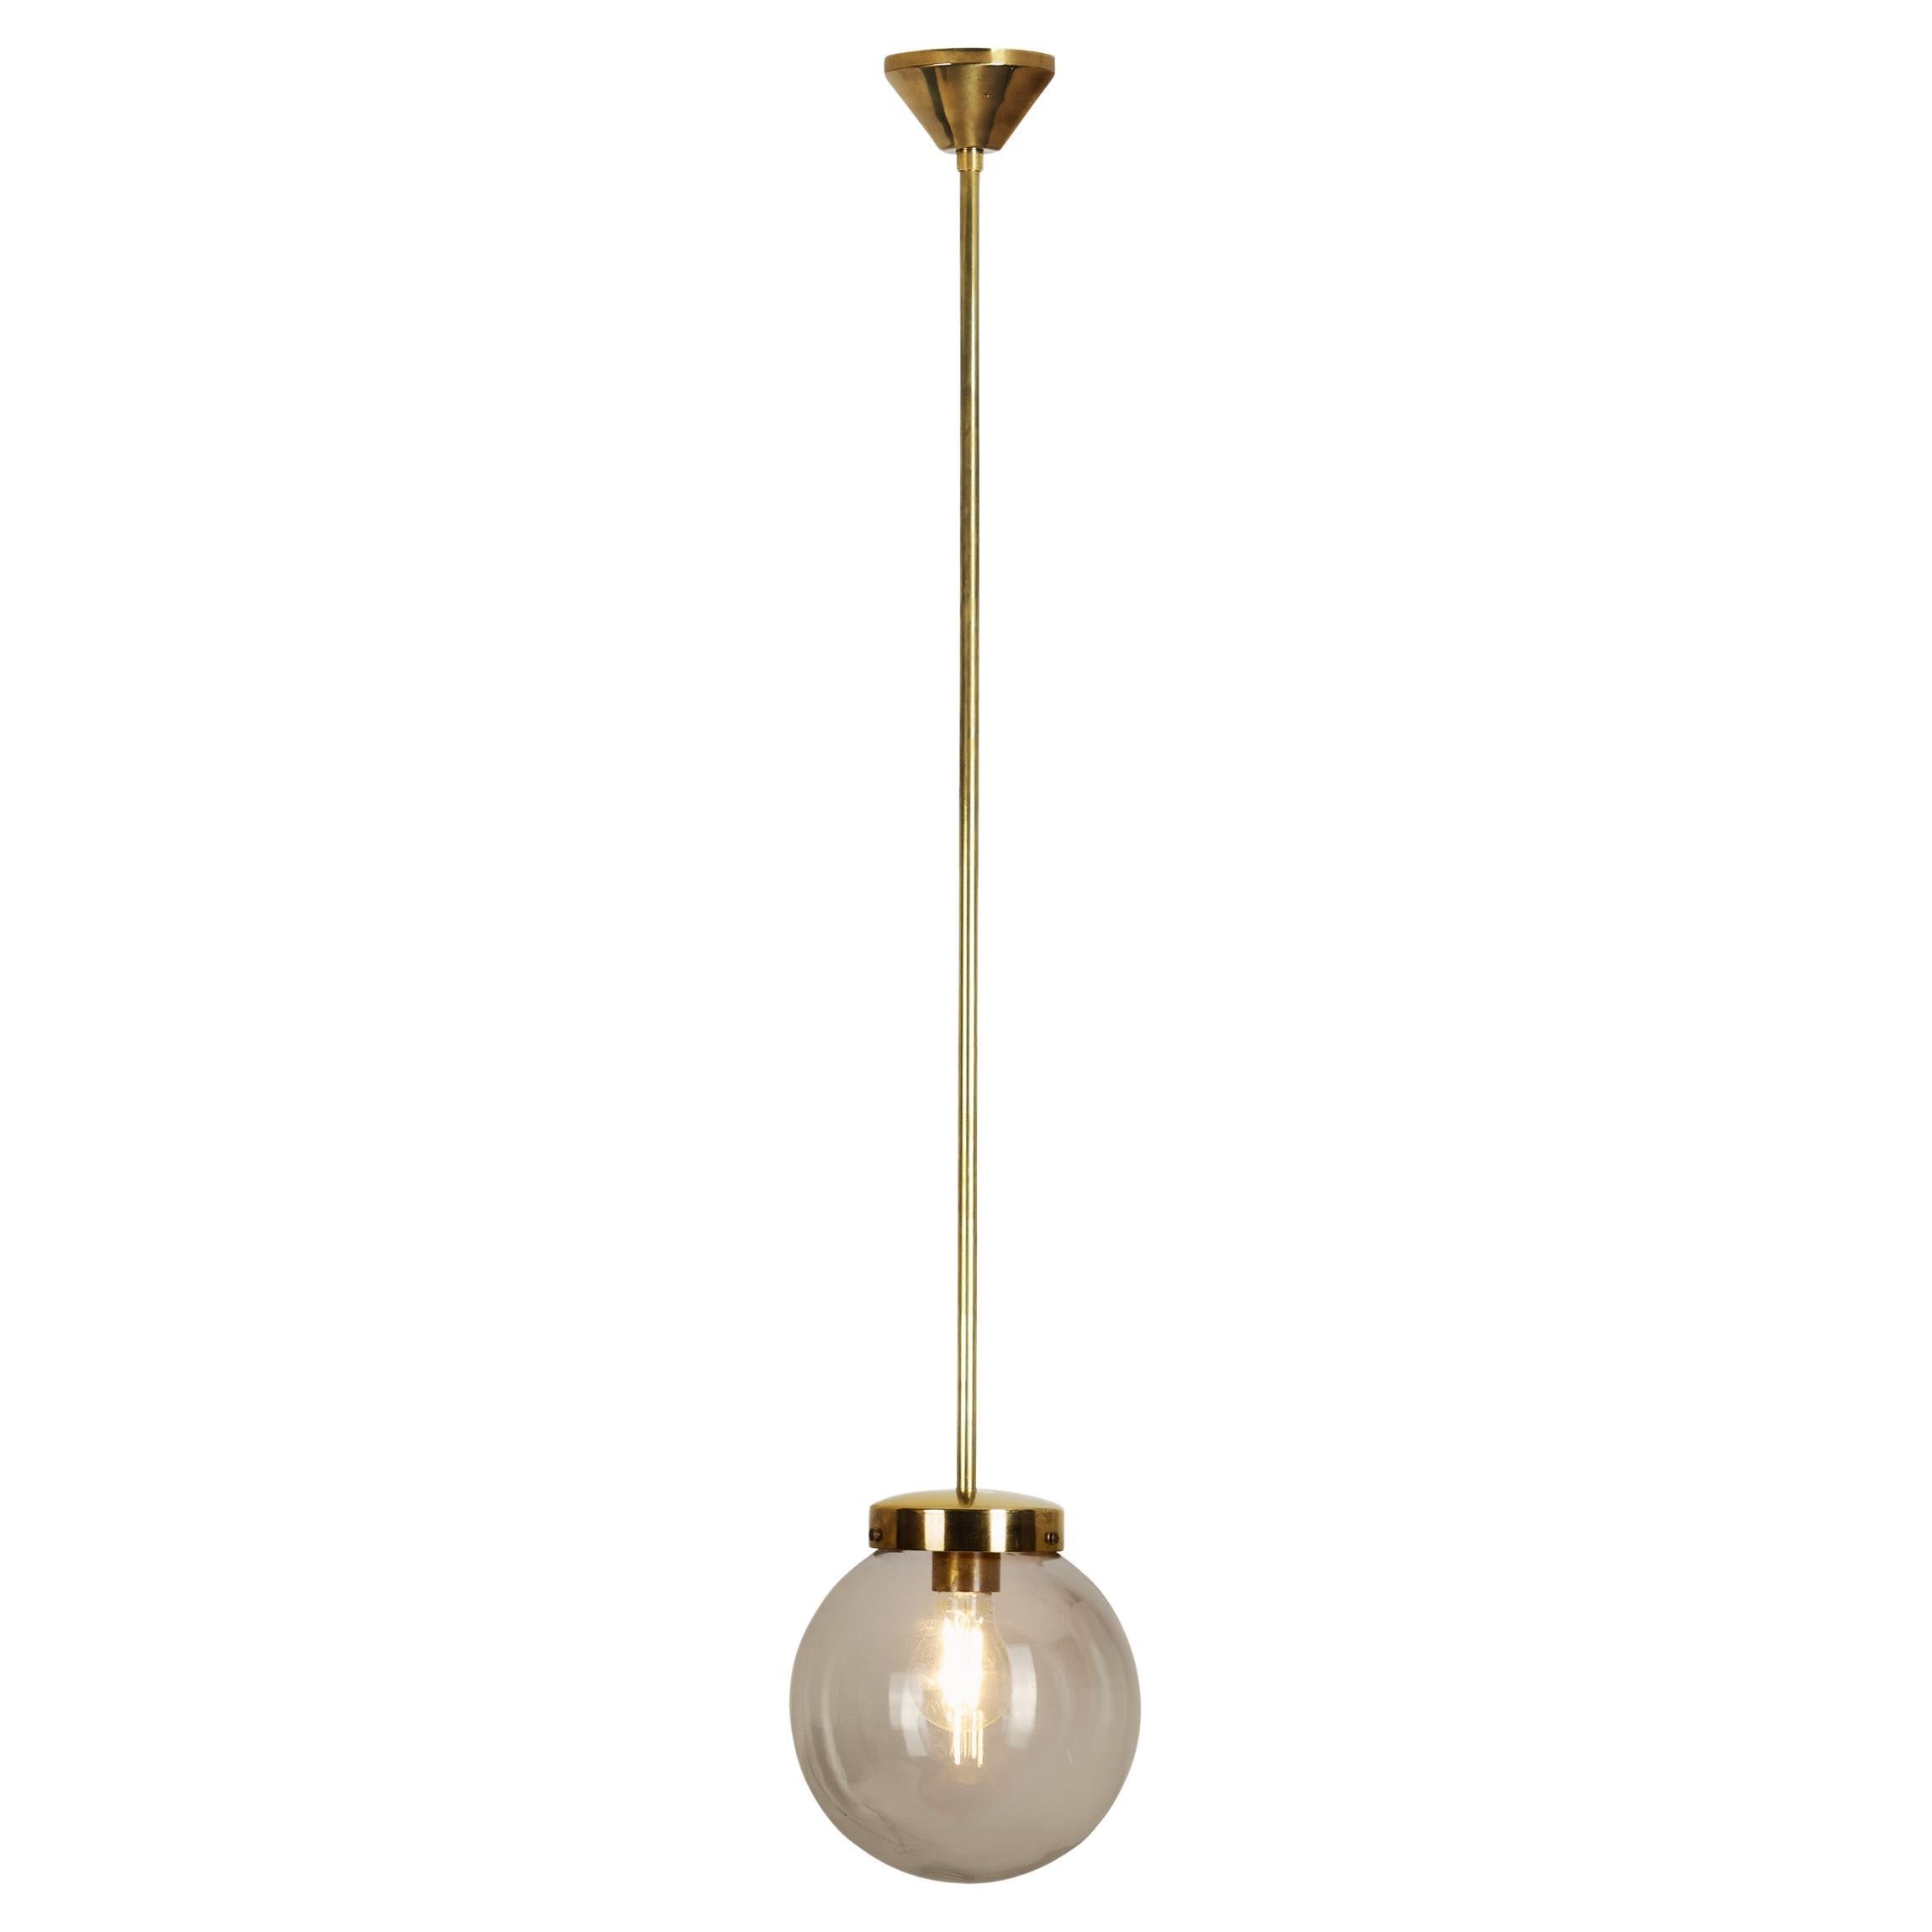 Mid-Century Modern Brass and Glass Ceiling Lamp, Europe ca 1950s